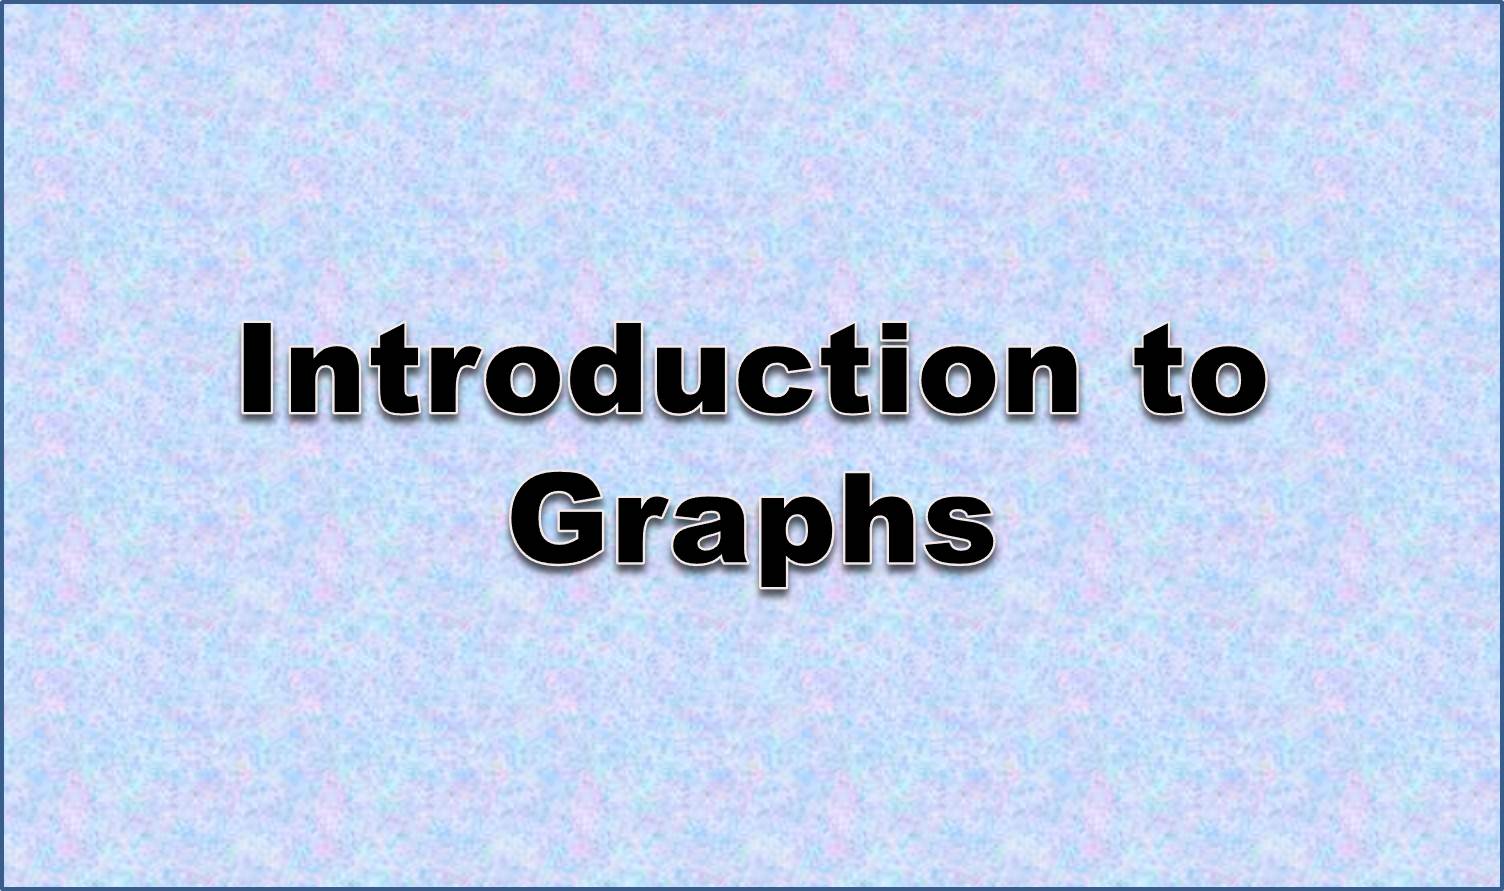 http://study.aisectonline.com/images/Linear graphs word problems.jpg